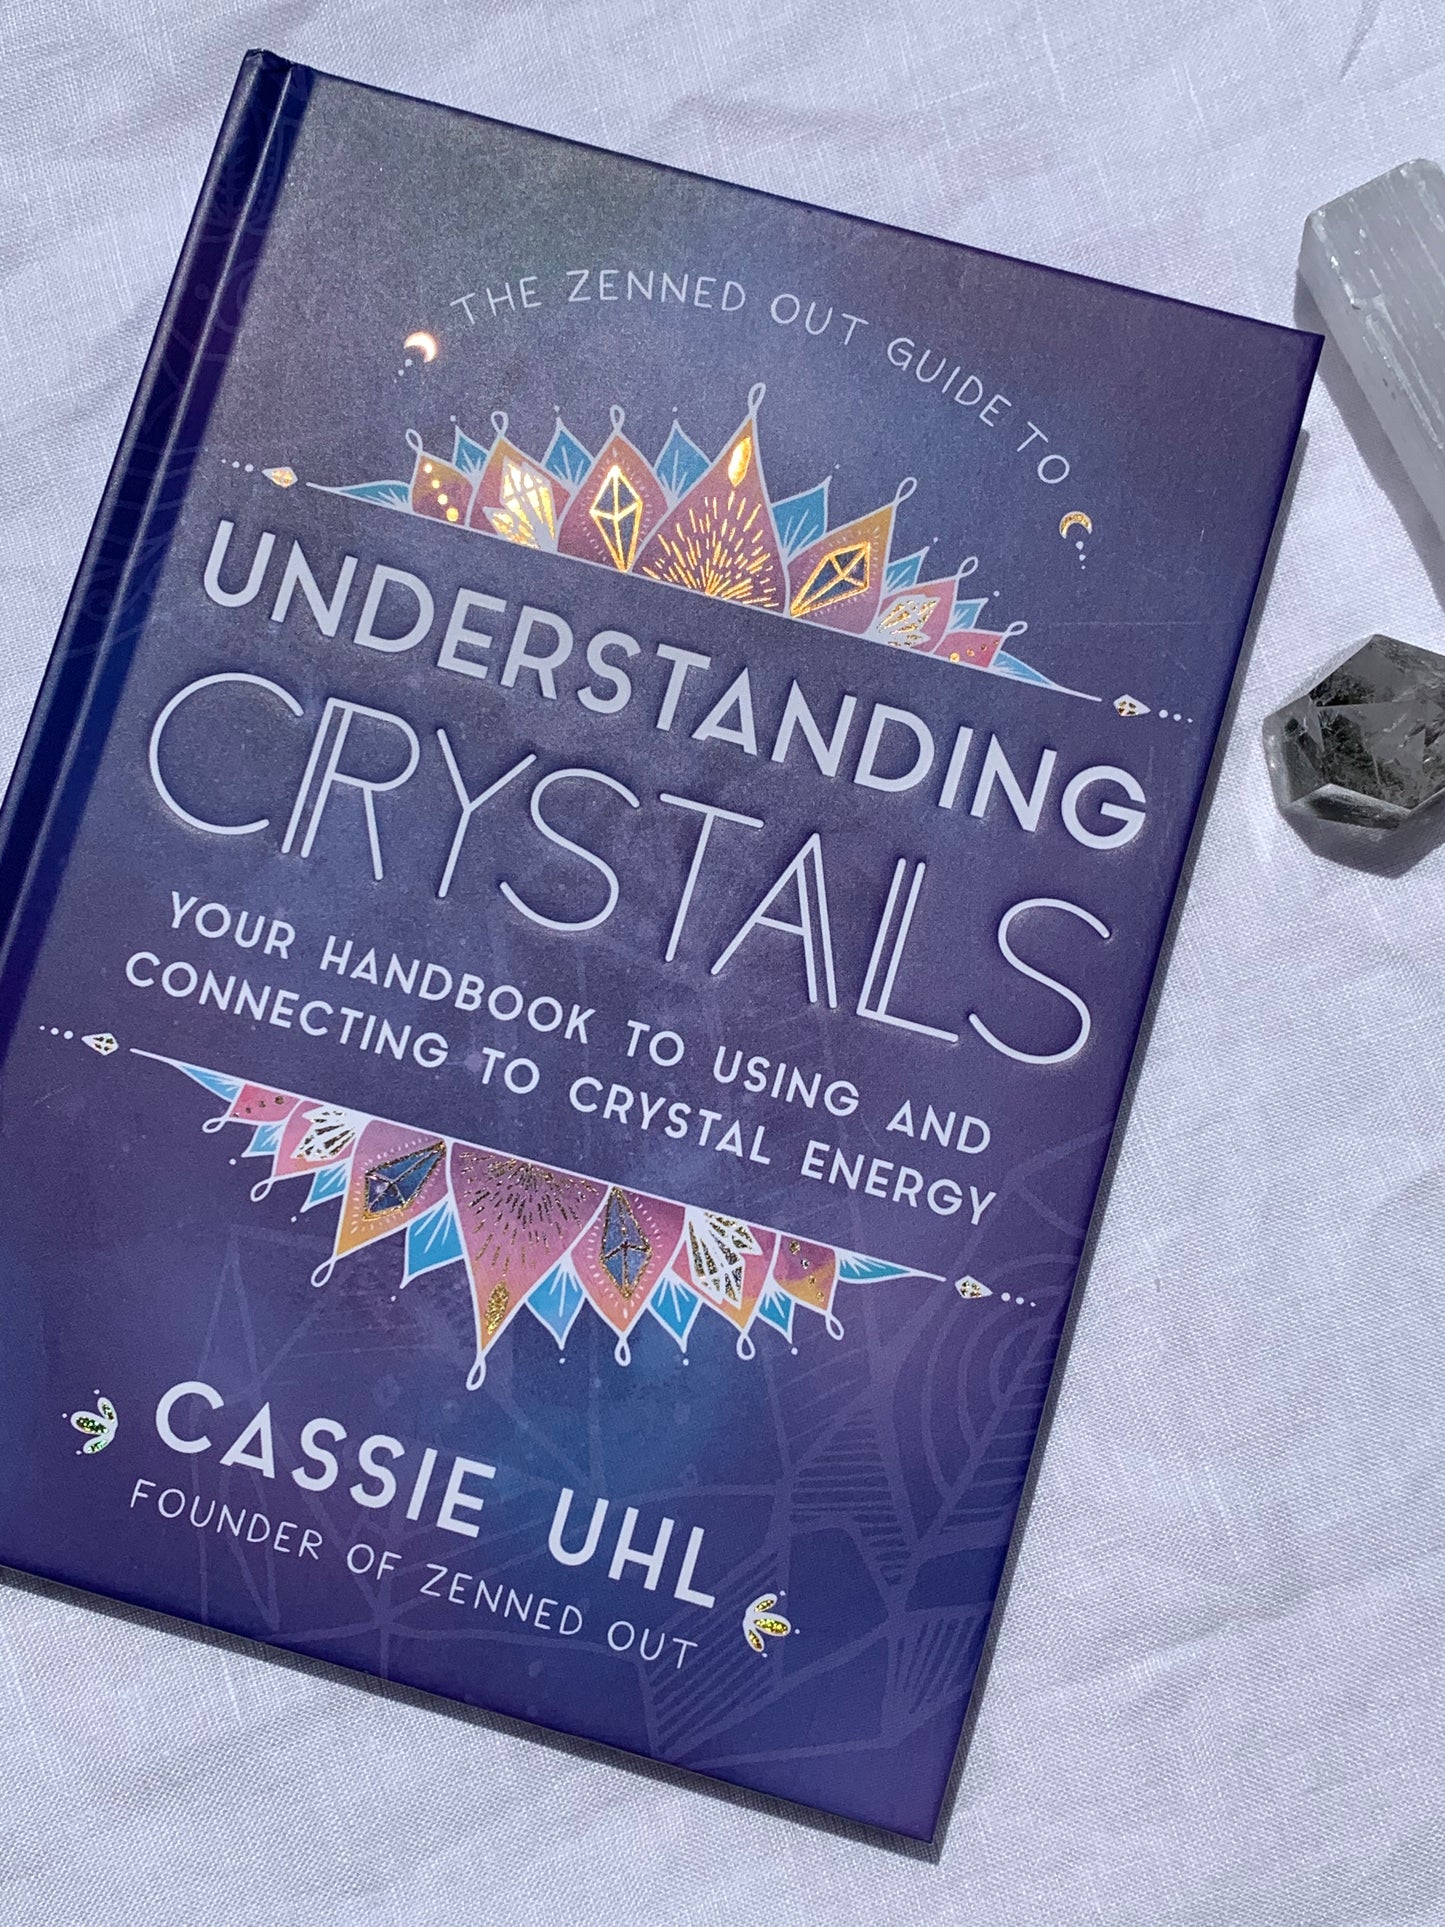 THE ZENNED OUT GUIDE TO UNDERSTAND CRYSTALS